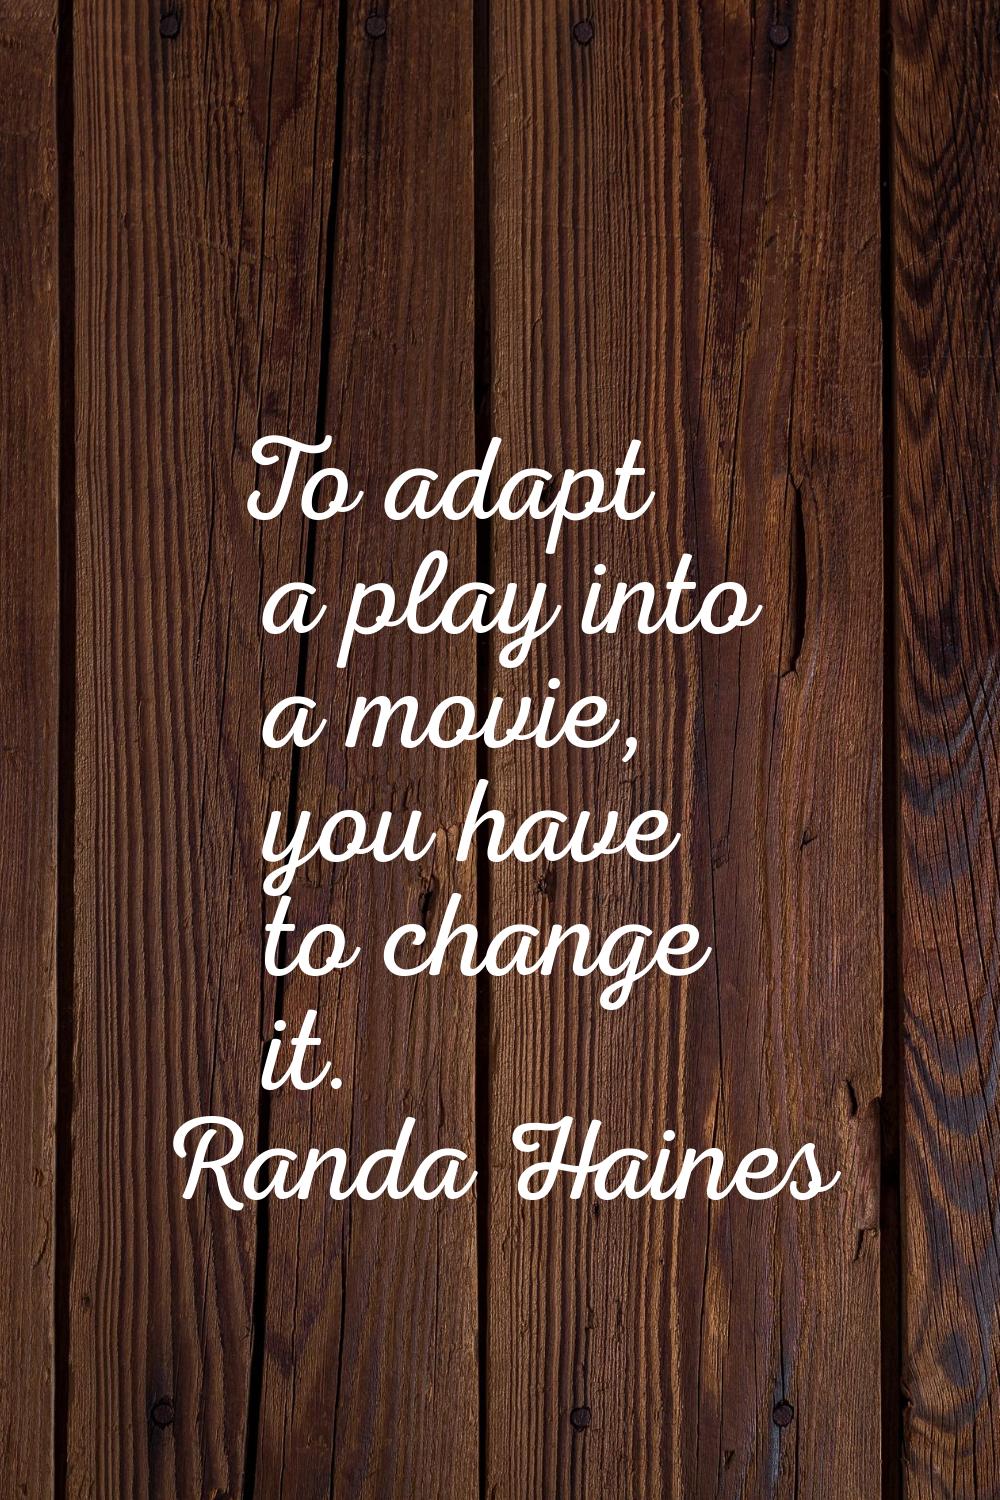 To adapt a play into a movie, you have to change it.